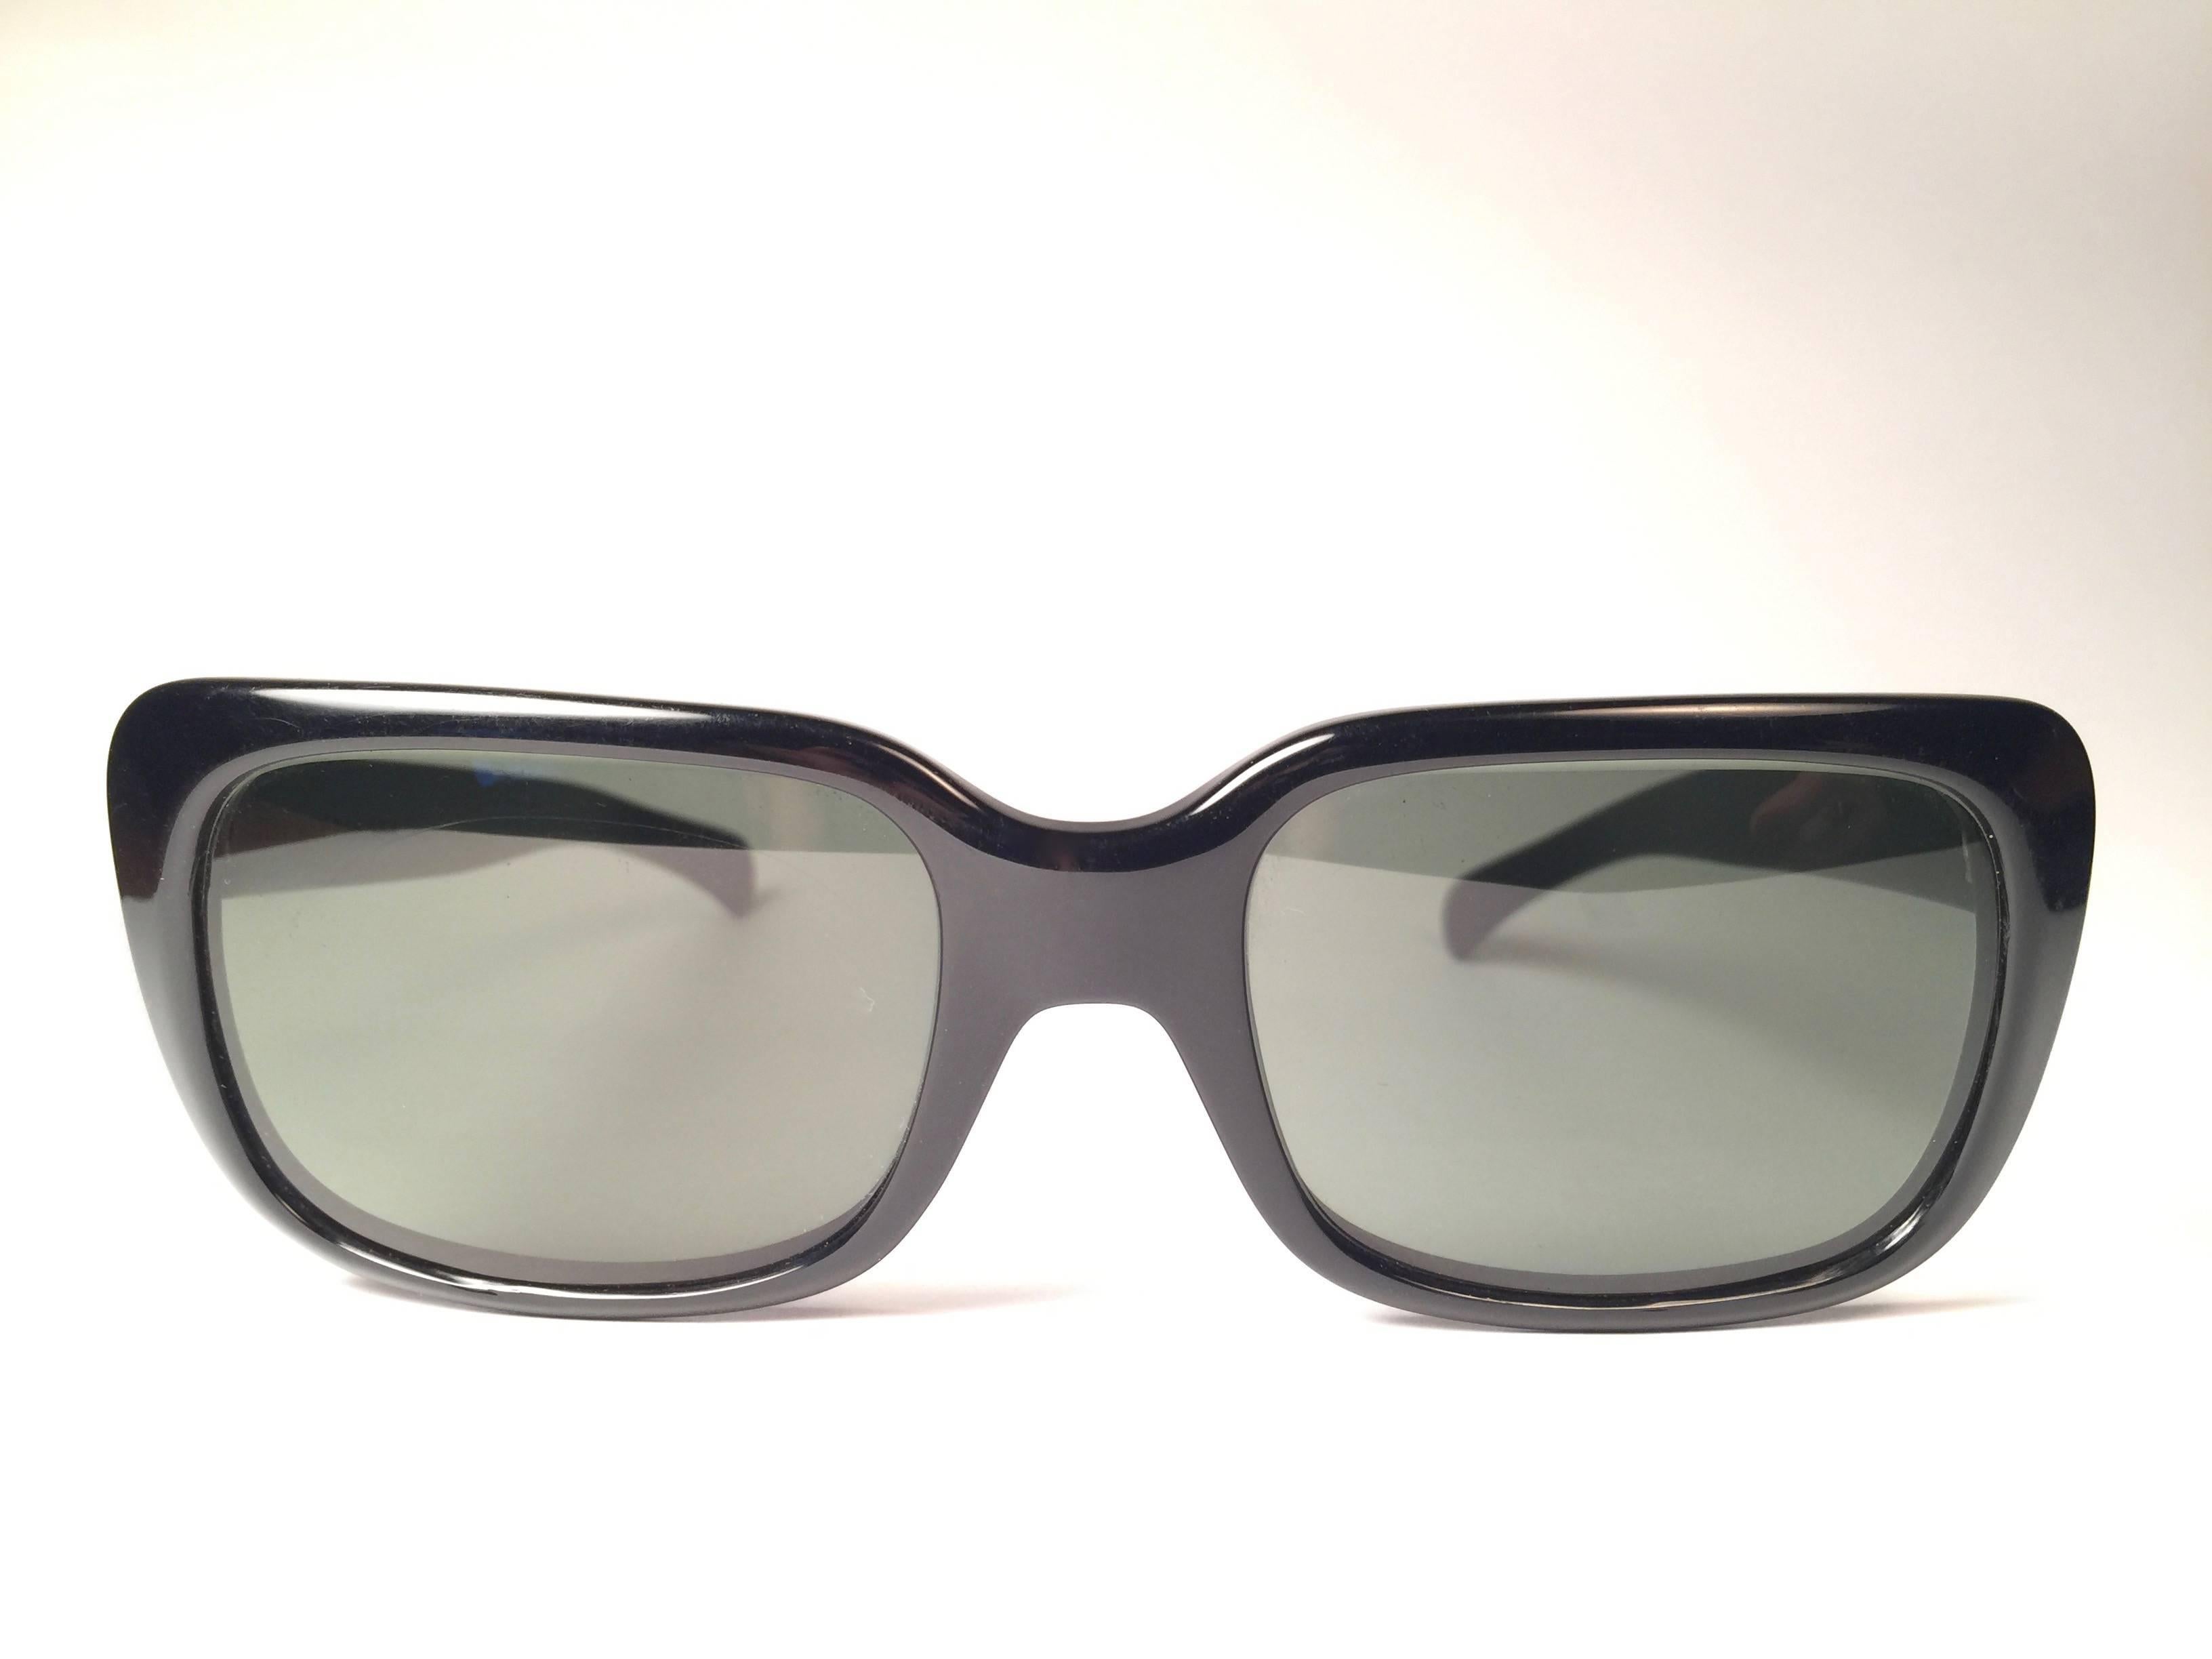 Super Rare 1970's Monti. Bausch and Lomb USA Made. 
G15 grey lenses. 
Straight out of the 1970's. 
All hallmarks. Minor sign of wear due to 50 years of storage. 
A Piece of sunglasses history.